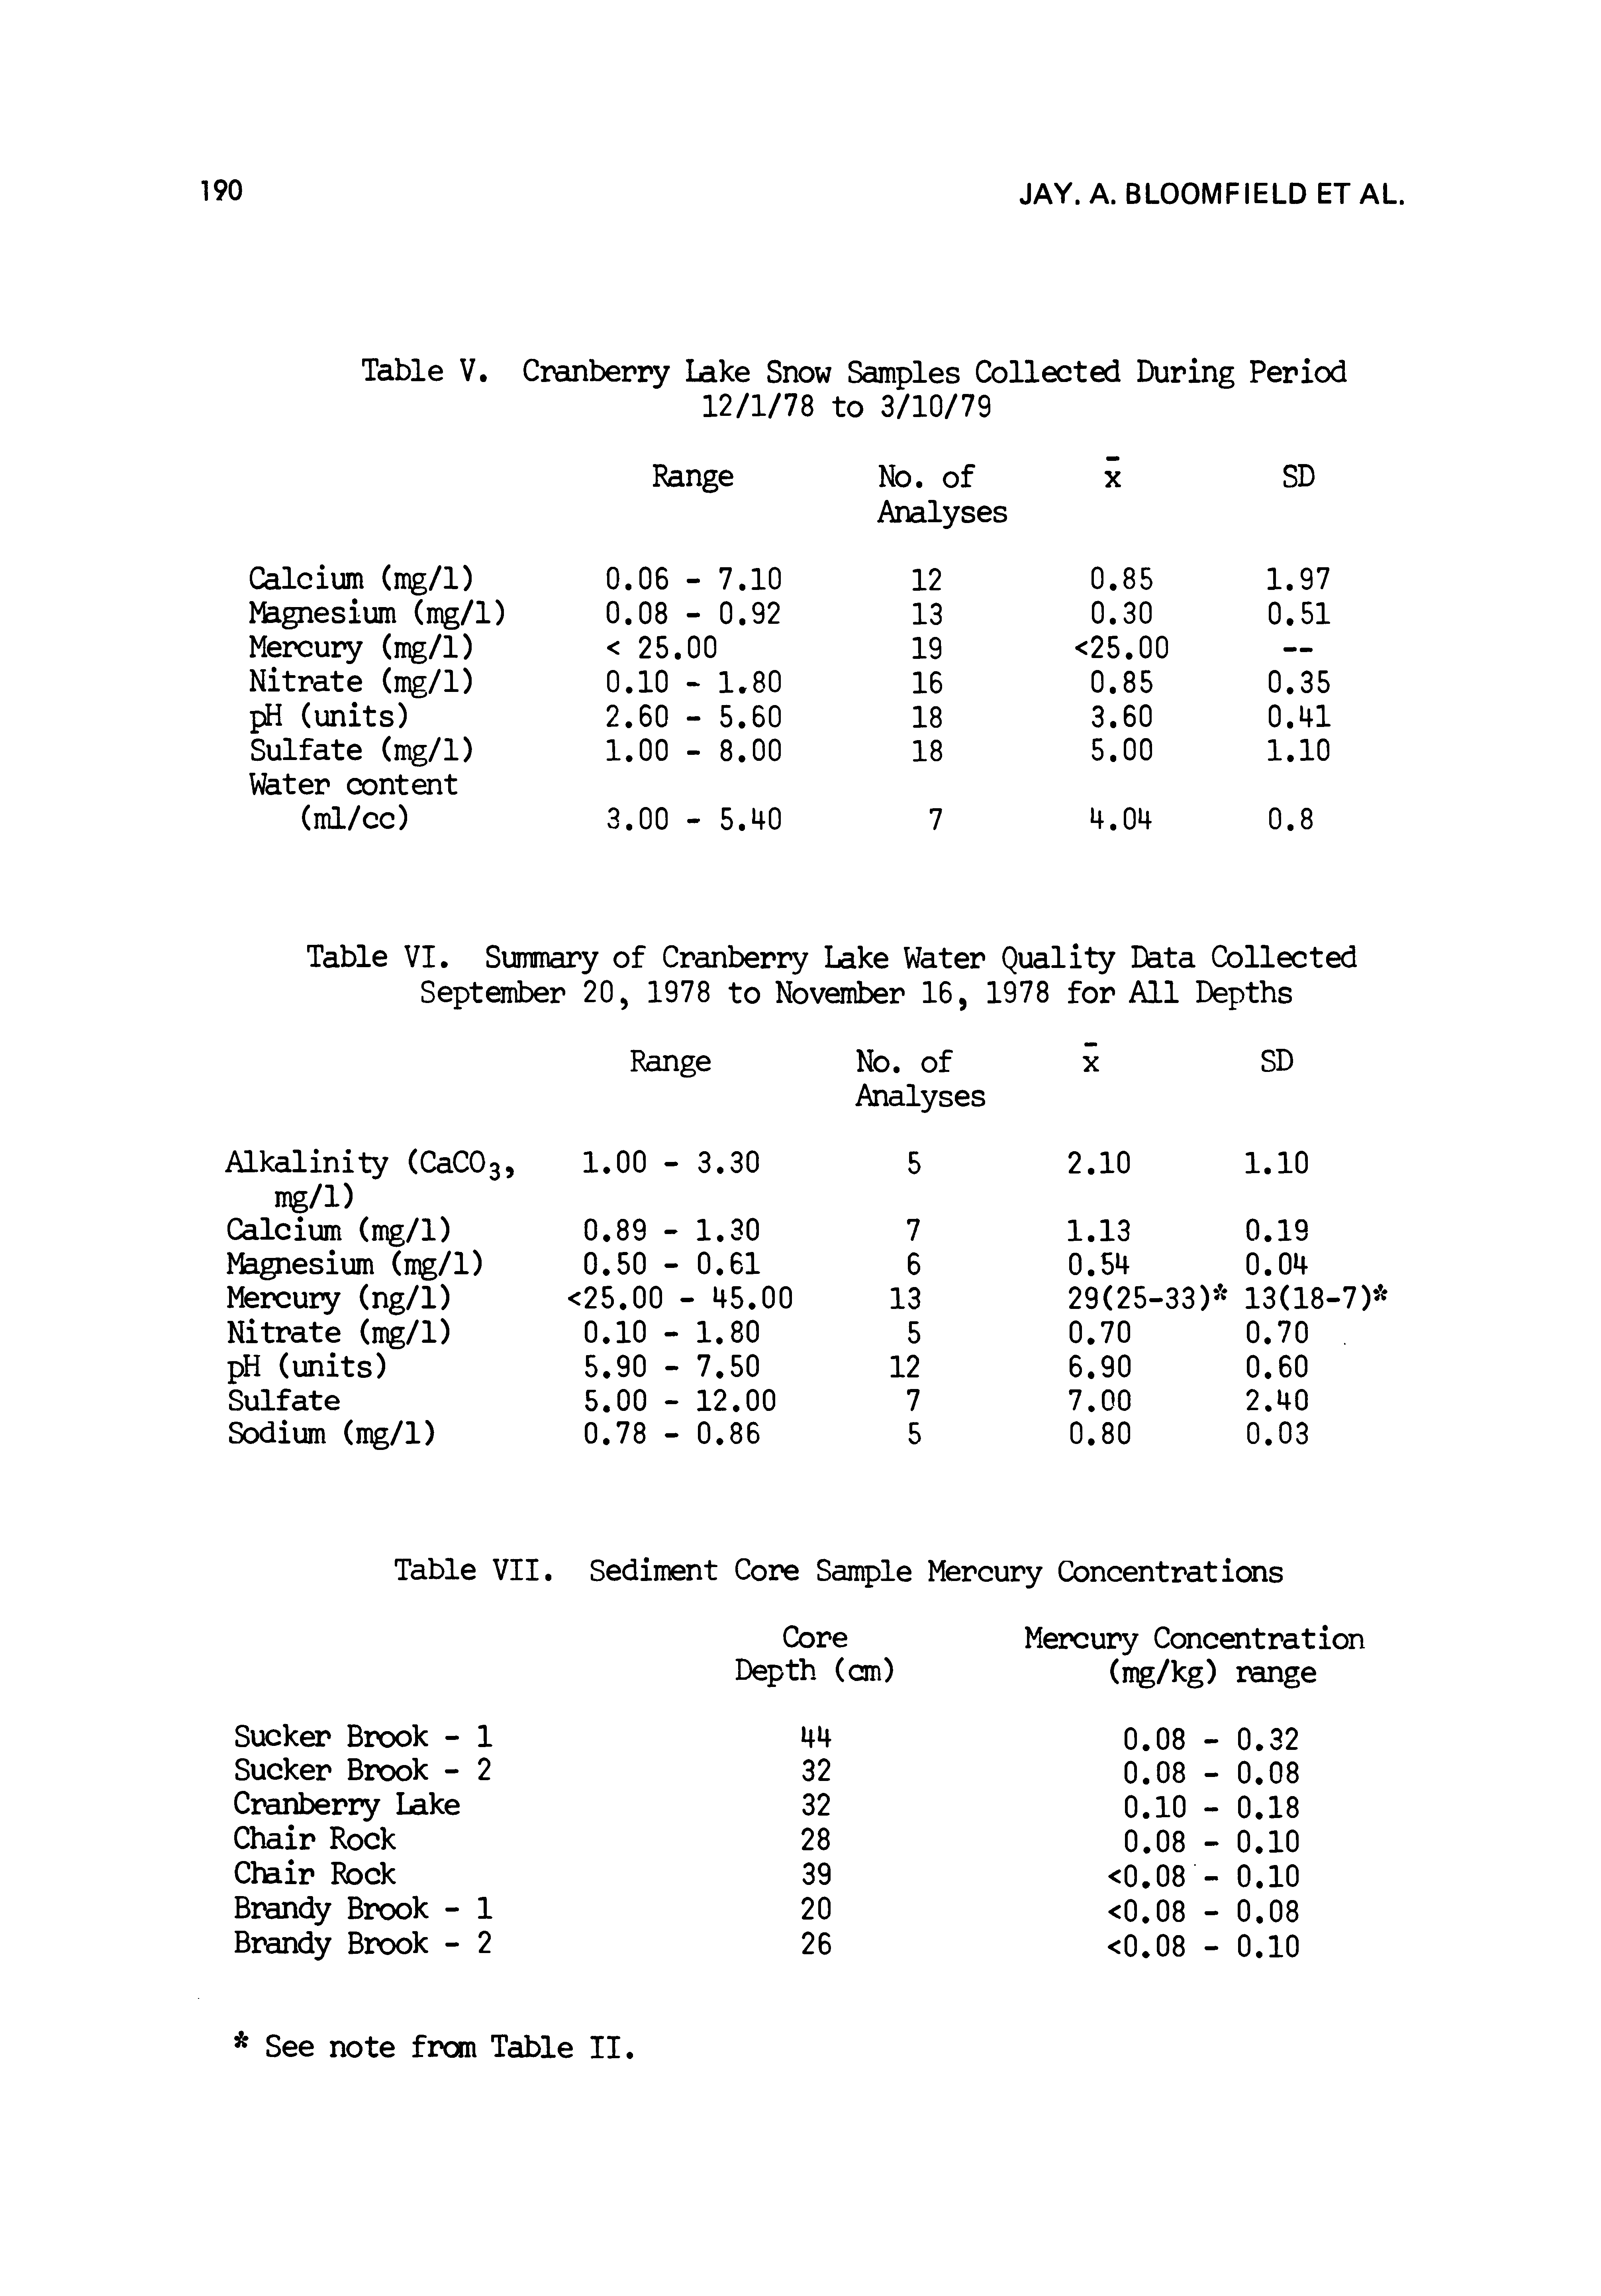 Table VI. Summary of Cranberry Lake Water Quality Data Collected September 20, 1978 to November 16, 1978 for All Depths...